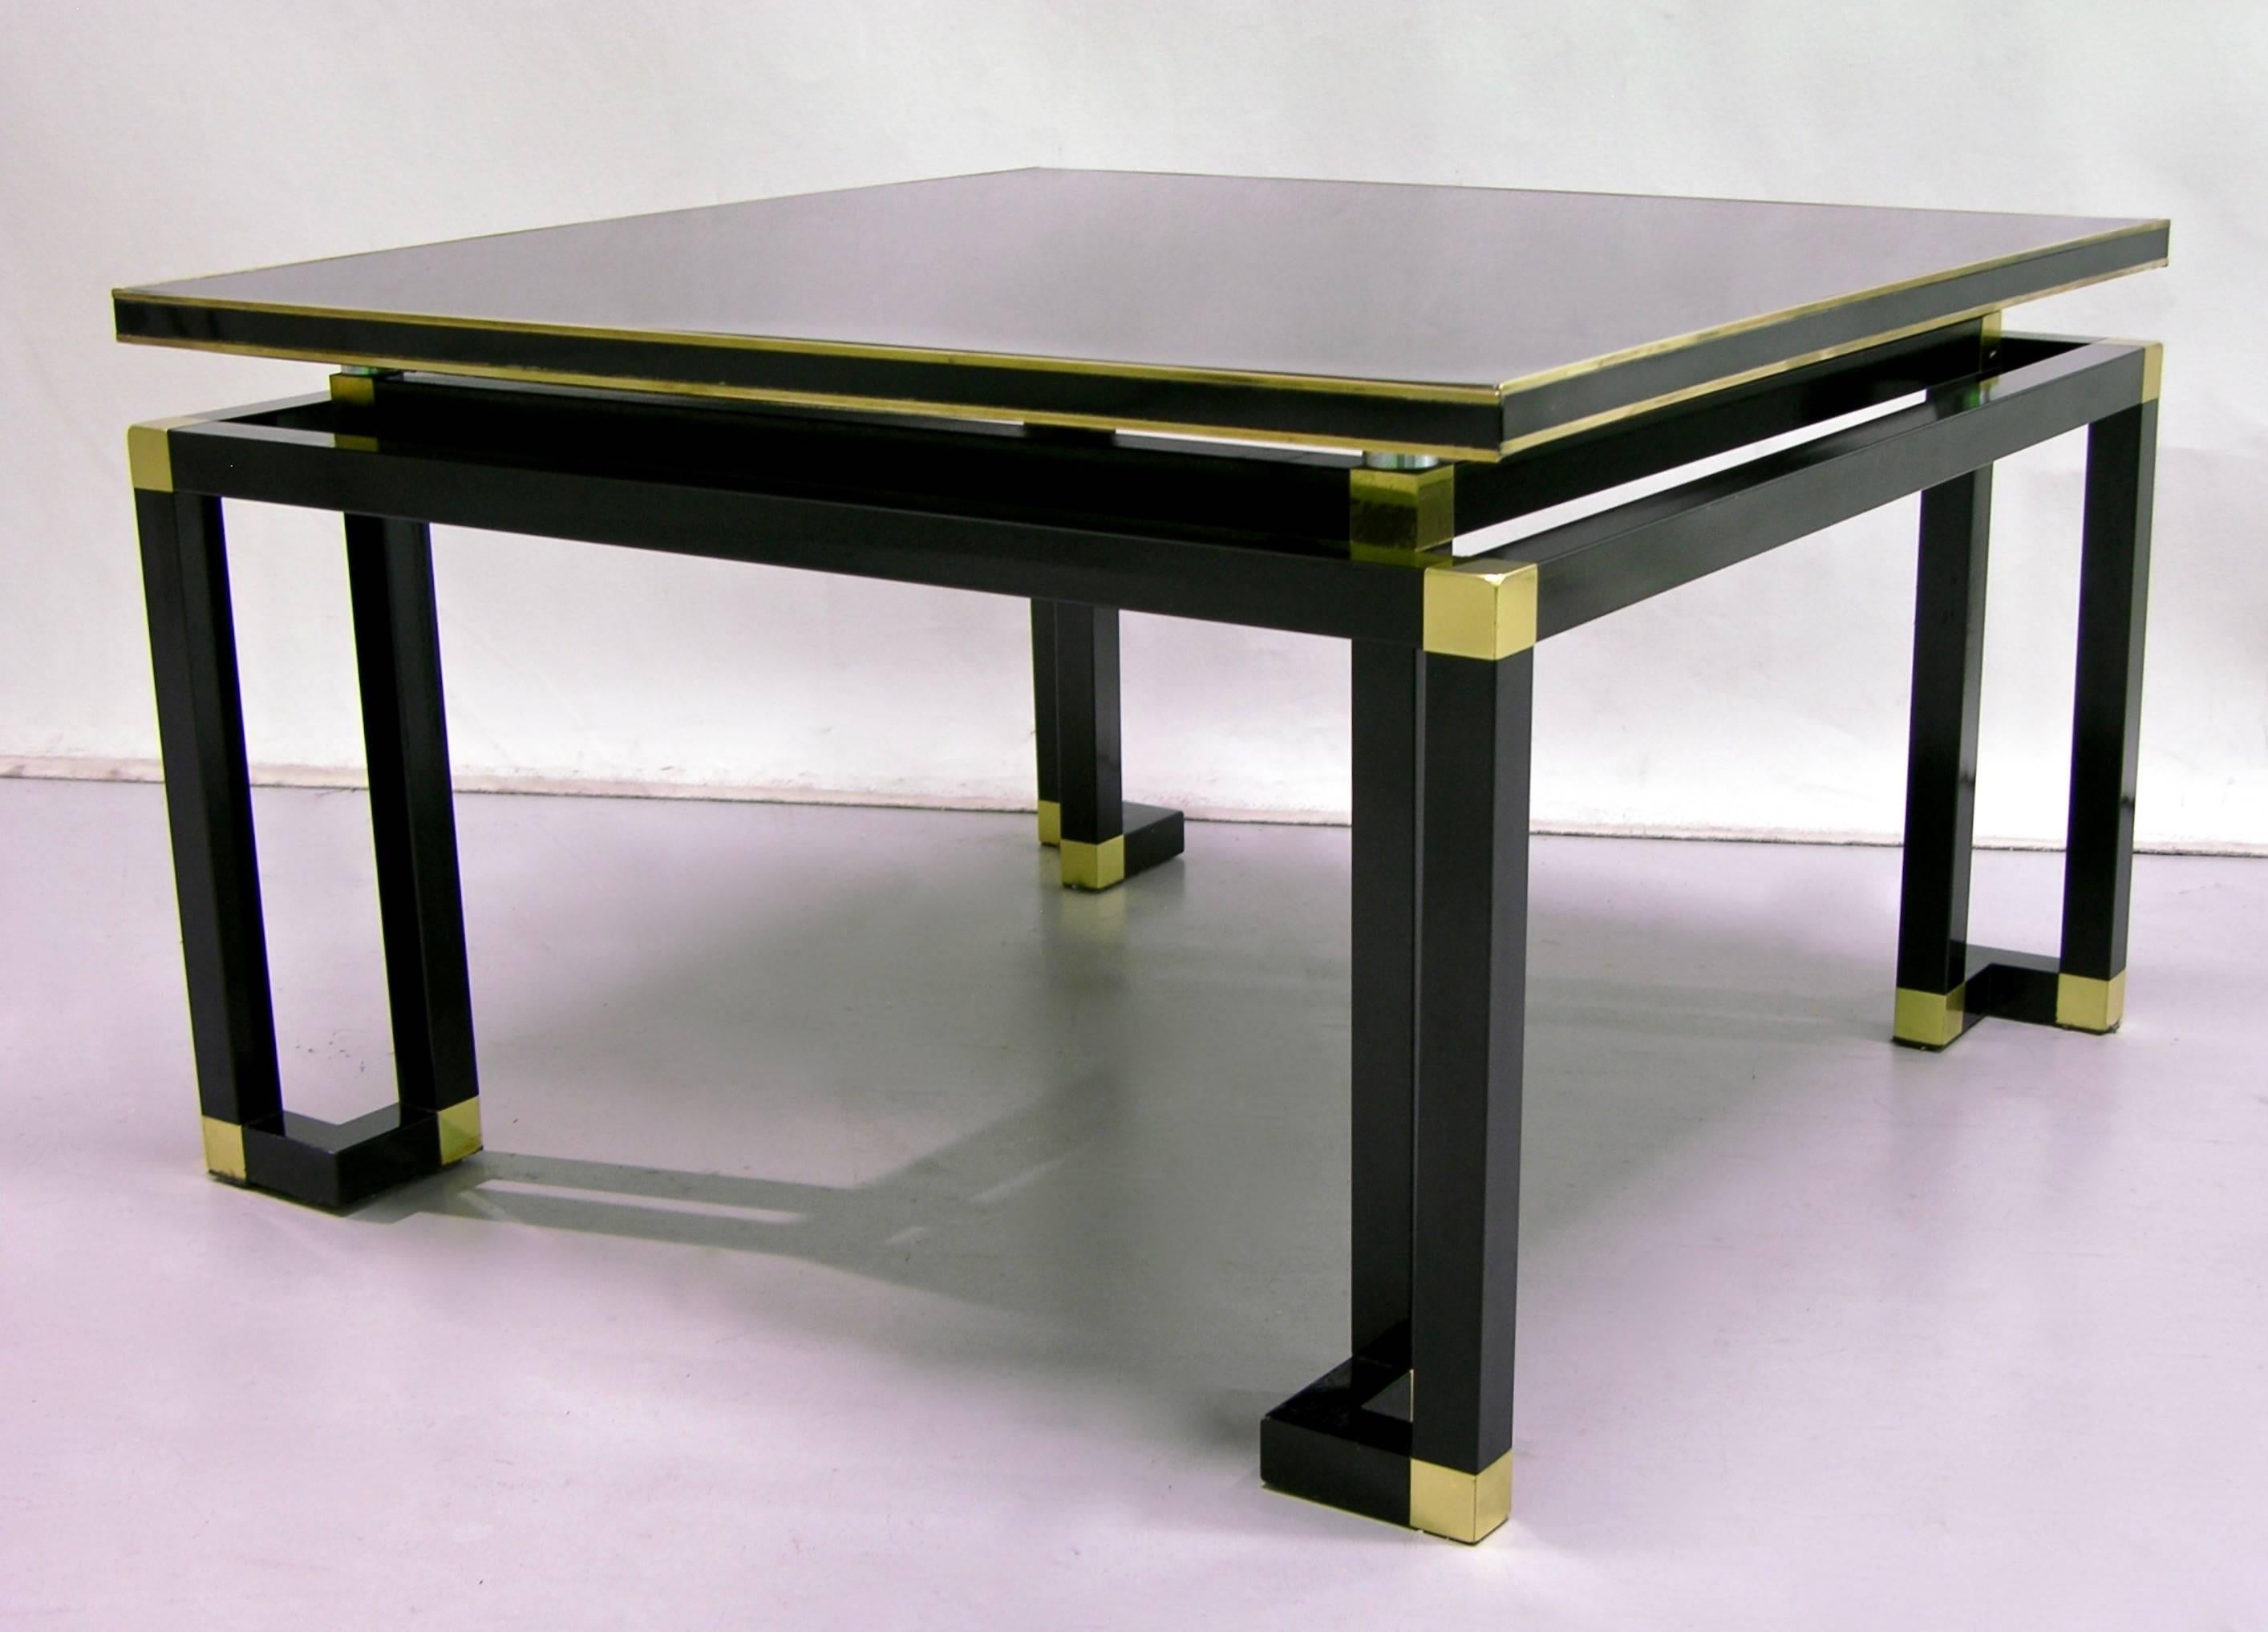 Hand-Crafted Studio A 1970s Italian Vintage Black Lacquered Wood and Brass Coffee/Sofa Table